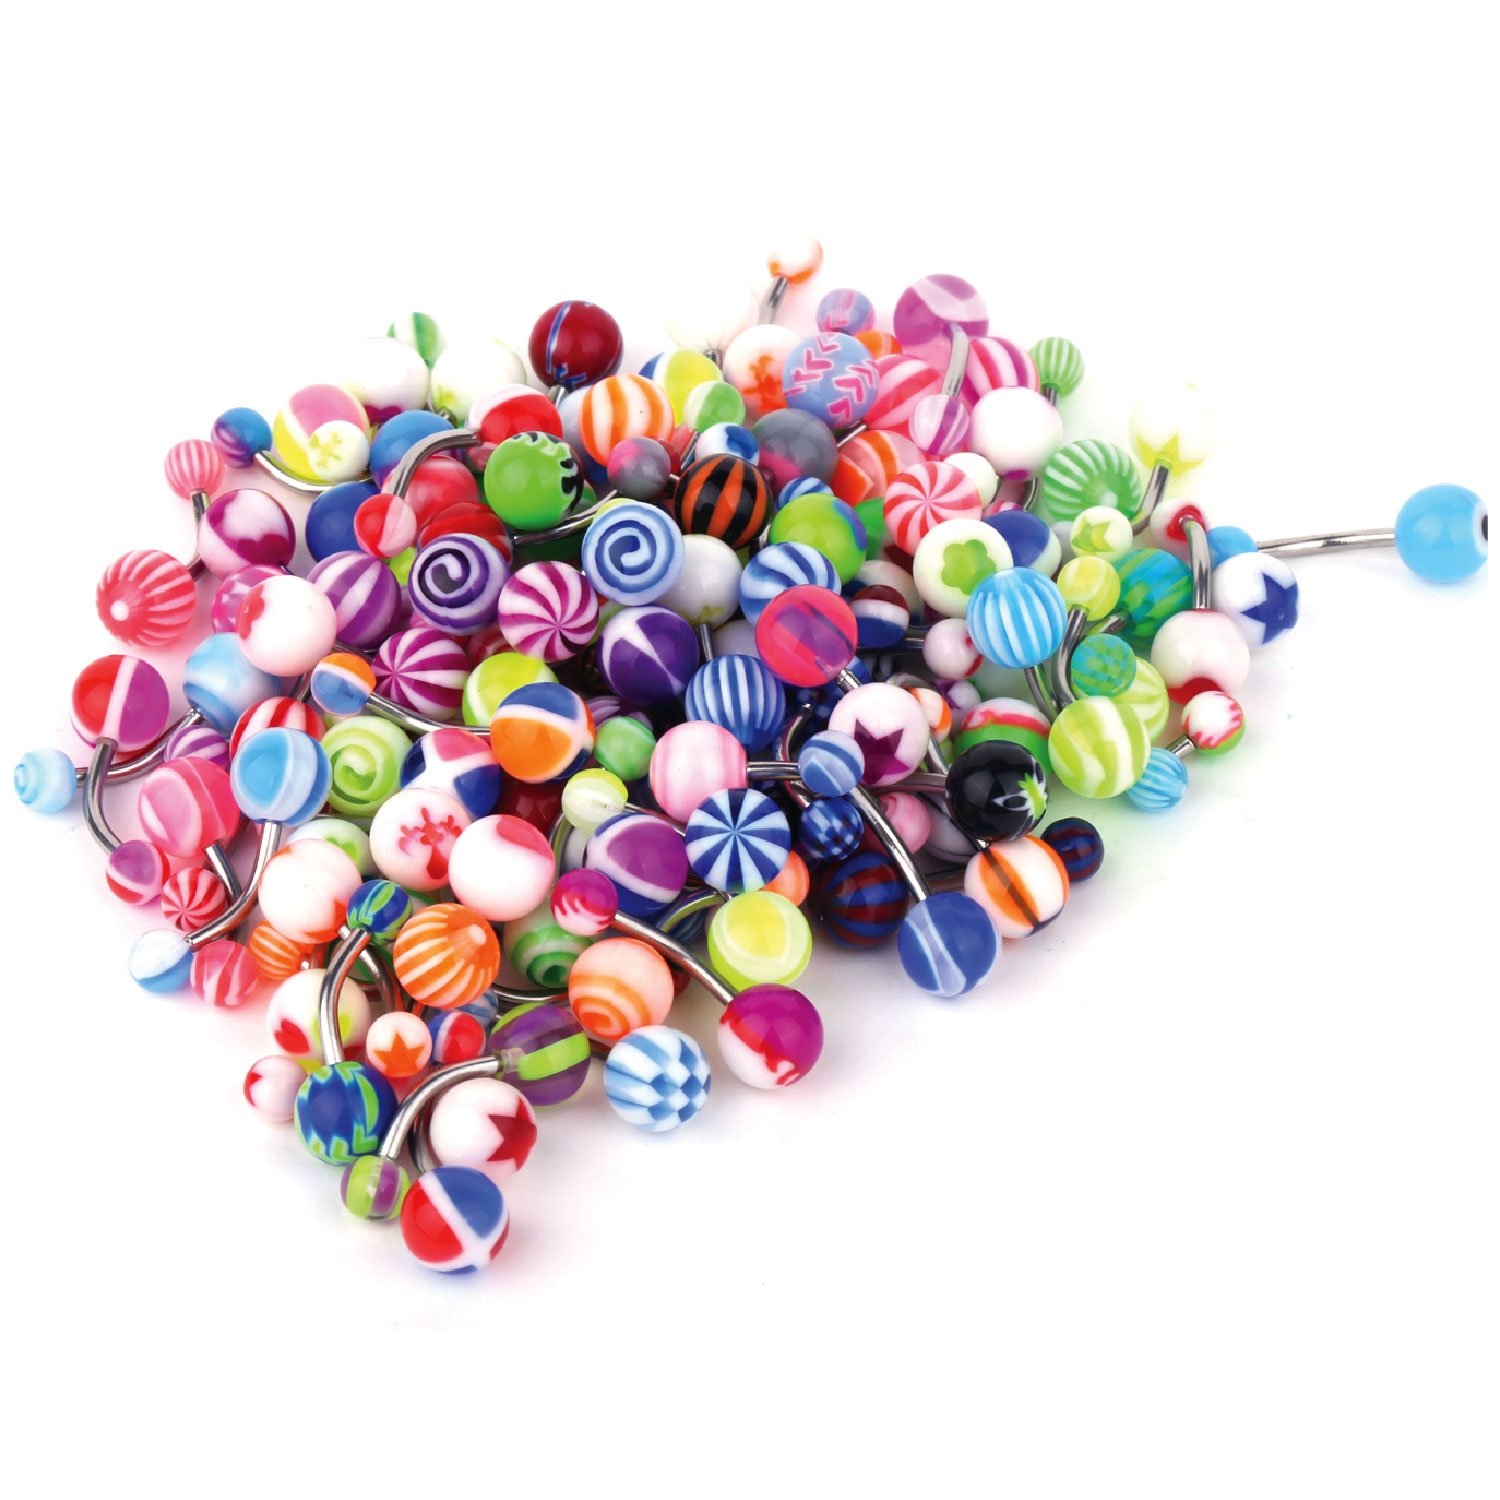 BodyJ4You 100PC Belly Button Rings Banana Barbells 14G Steel Flexible Bar Mix Color Body Jewelry